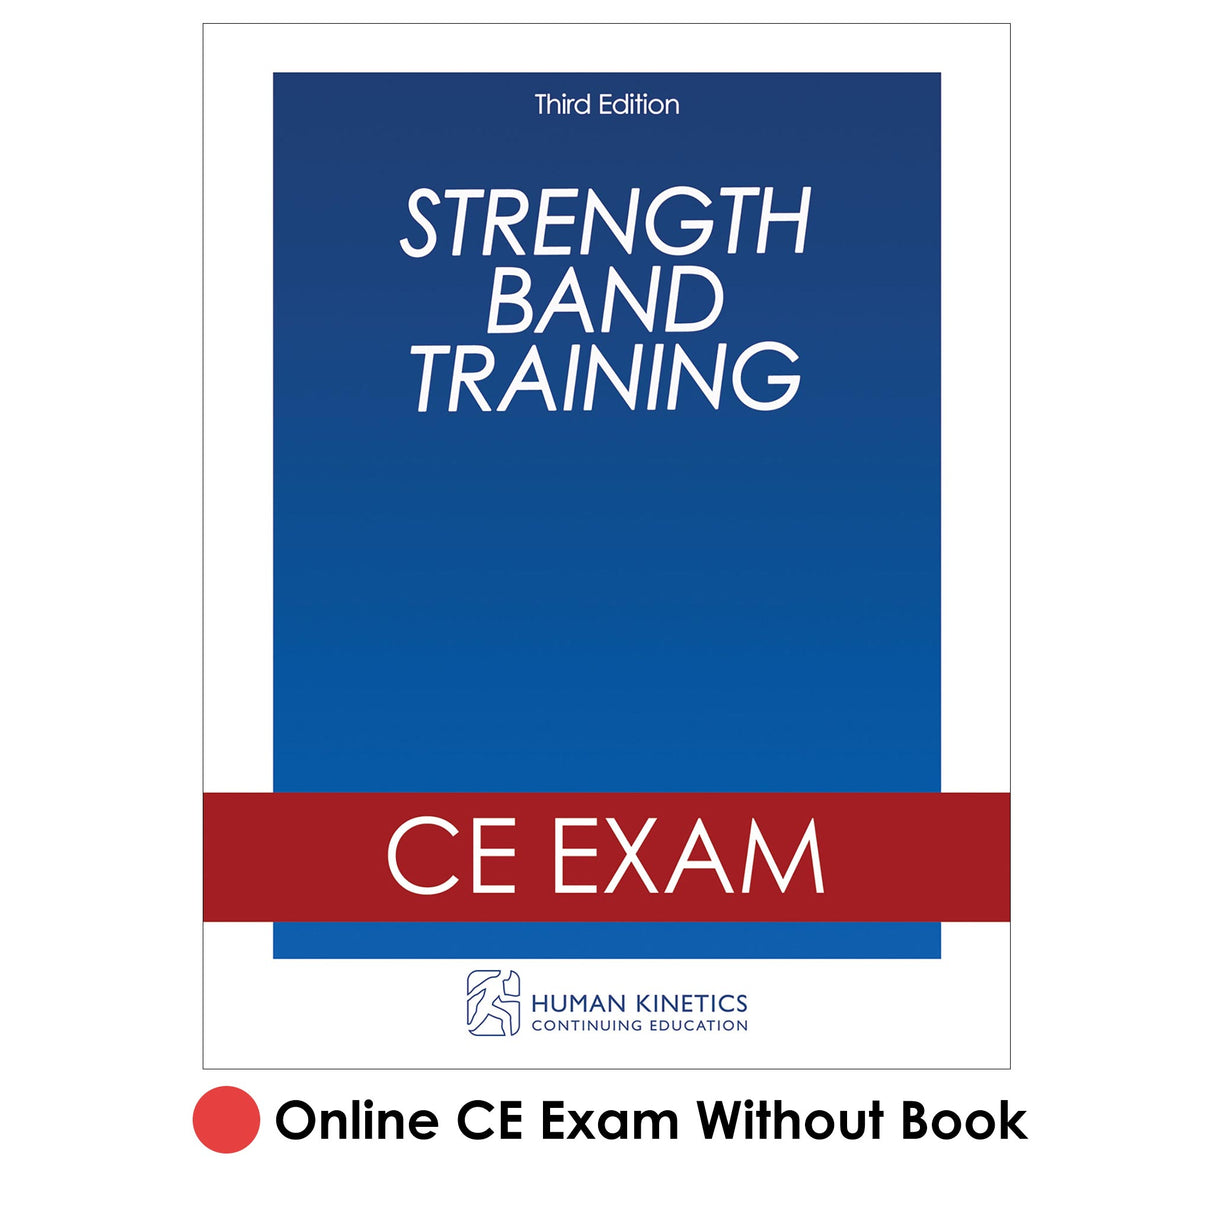 Strength Band Training 3rd Edition Online CE Exam Without Book